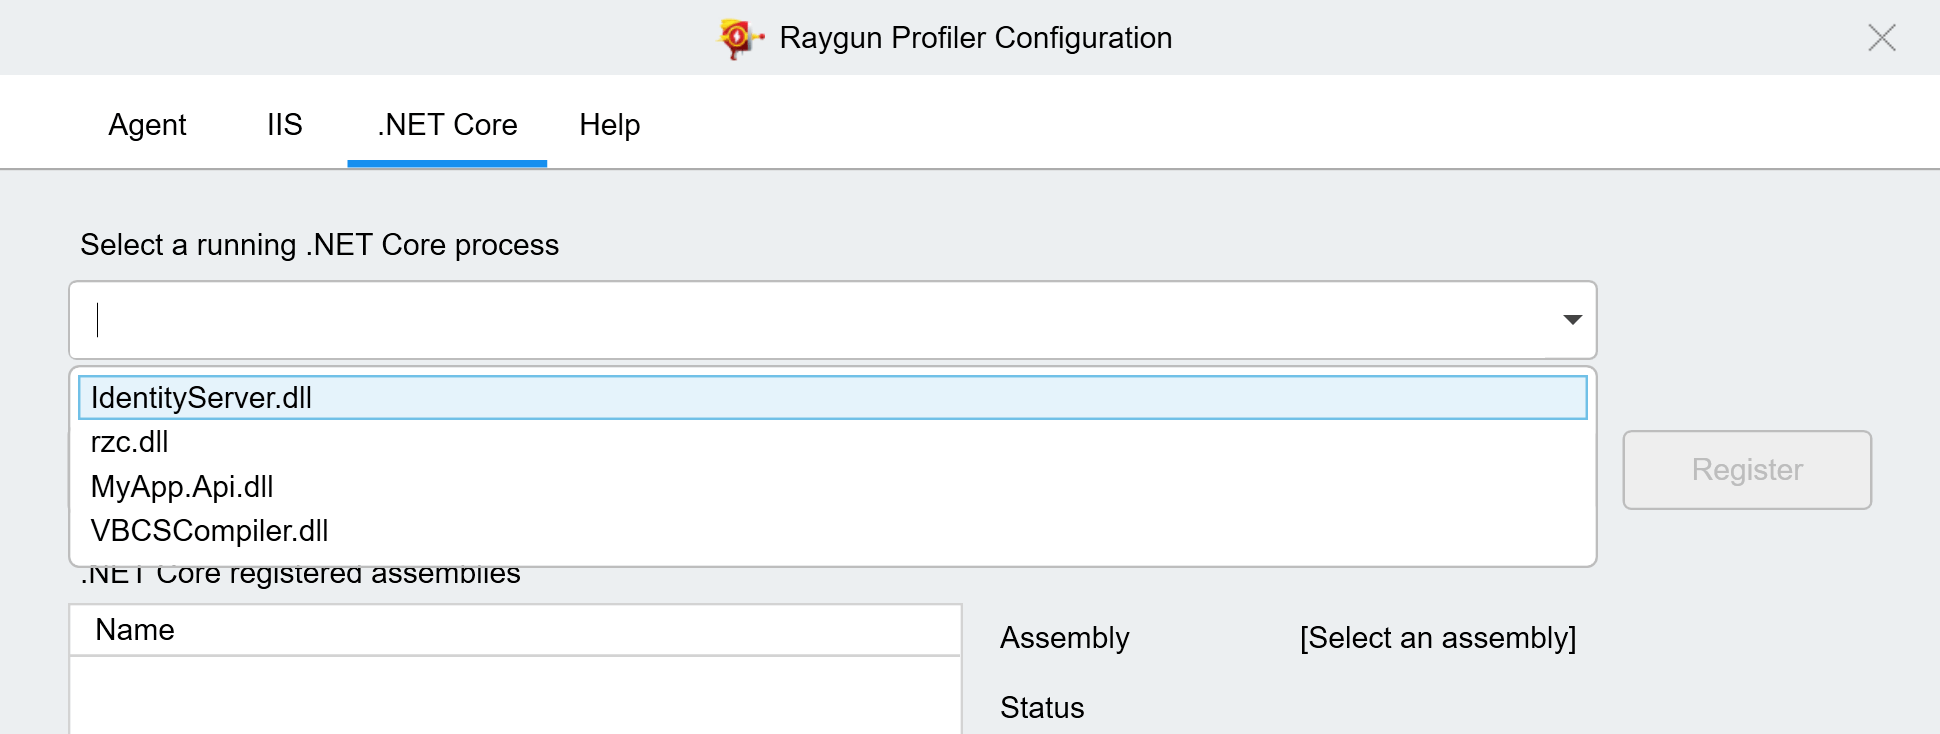 Registering an application with the profiler configuration tool